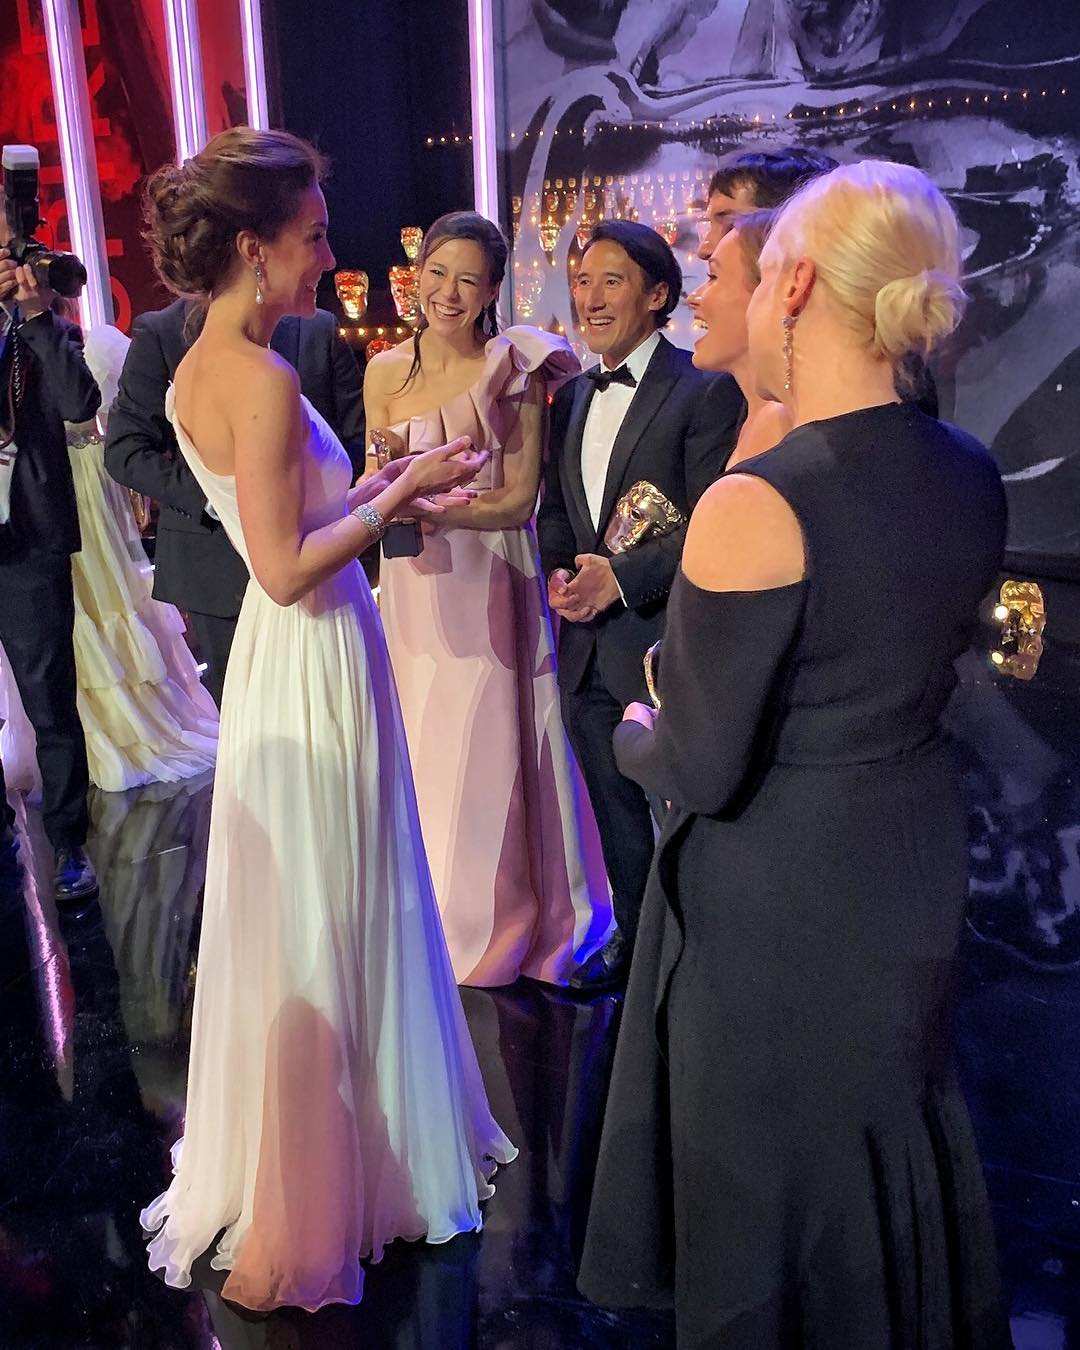 The Princess of Wales chats to the couple and documentary makers at the 2019 ceremony